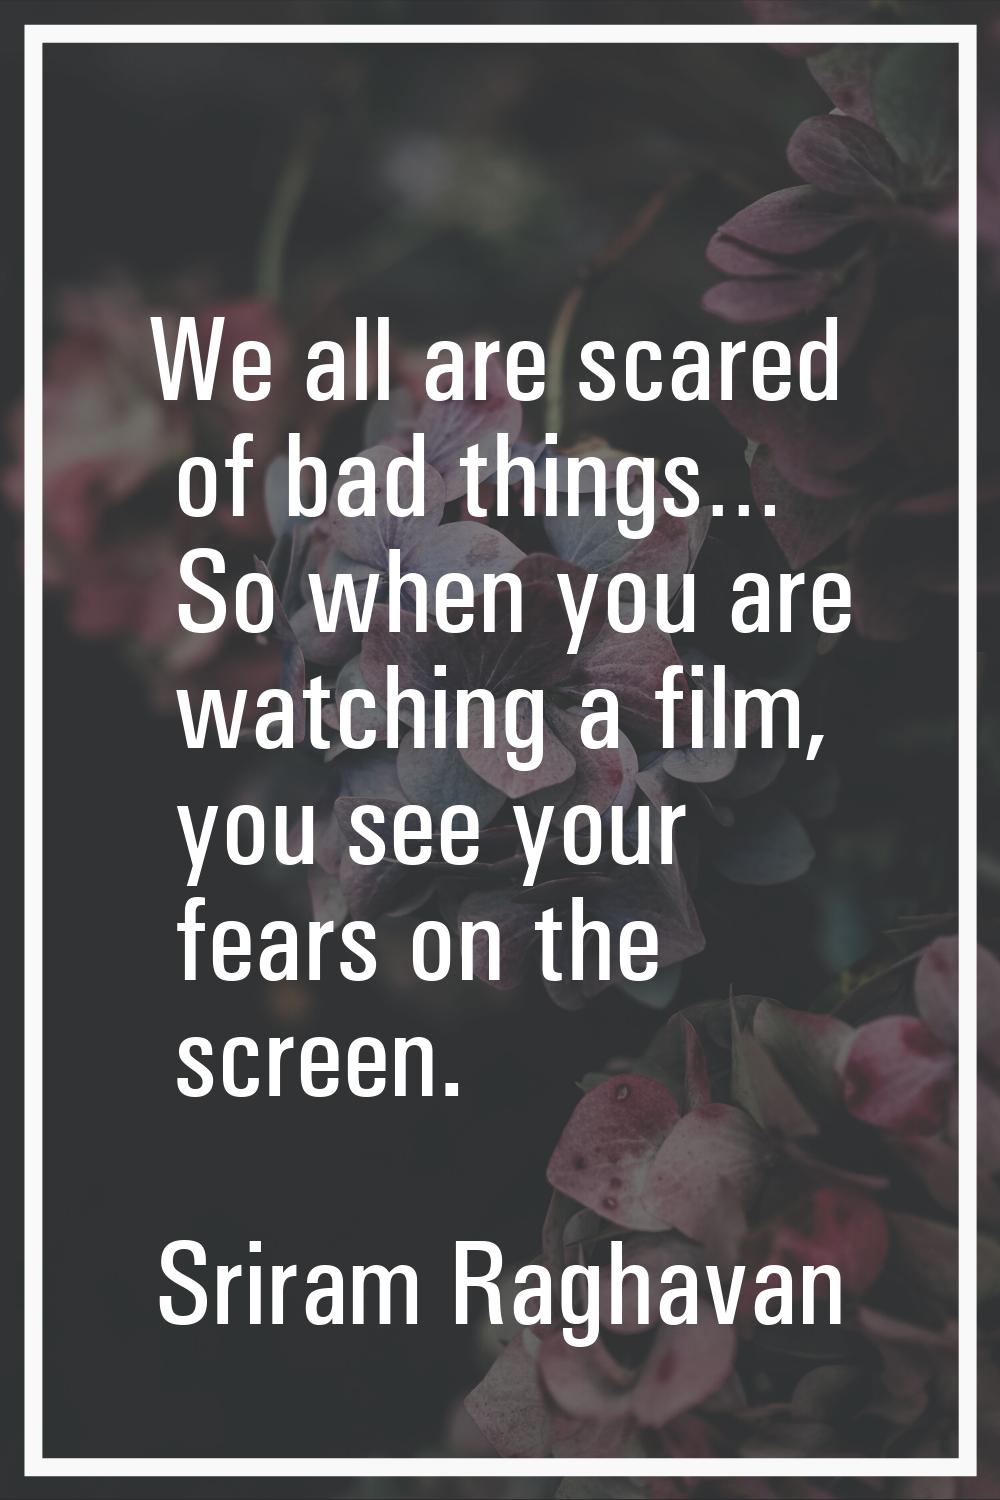 We all are scared of bad things… So when you are watching a film, you see your fears on the screen.